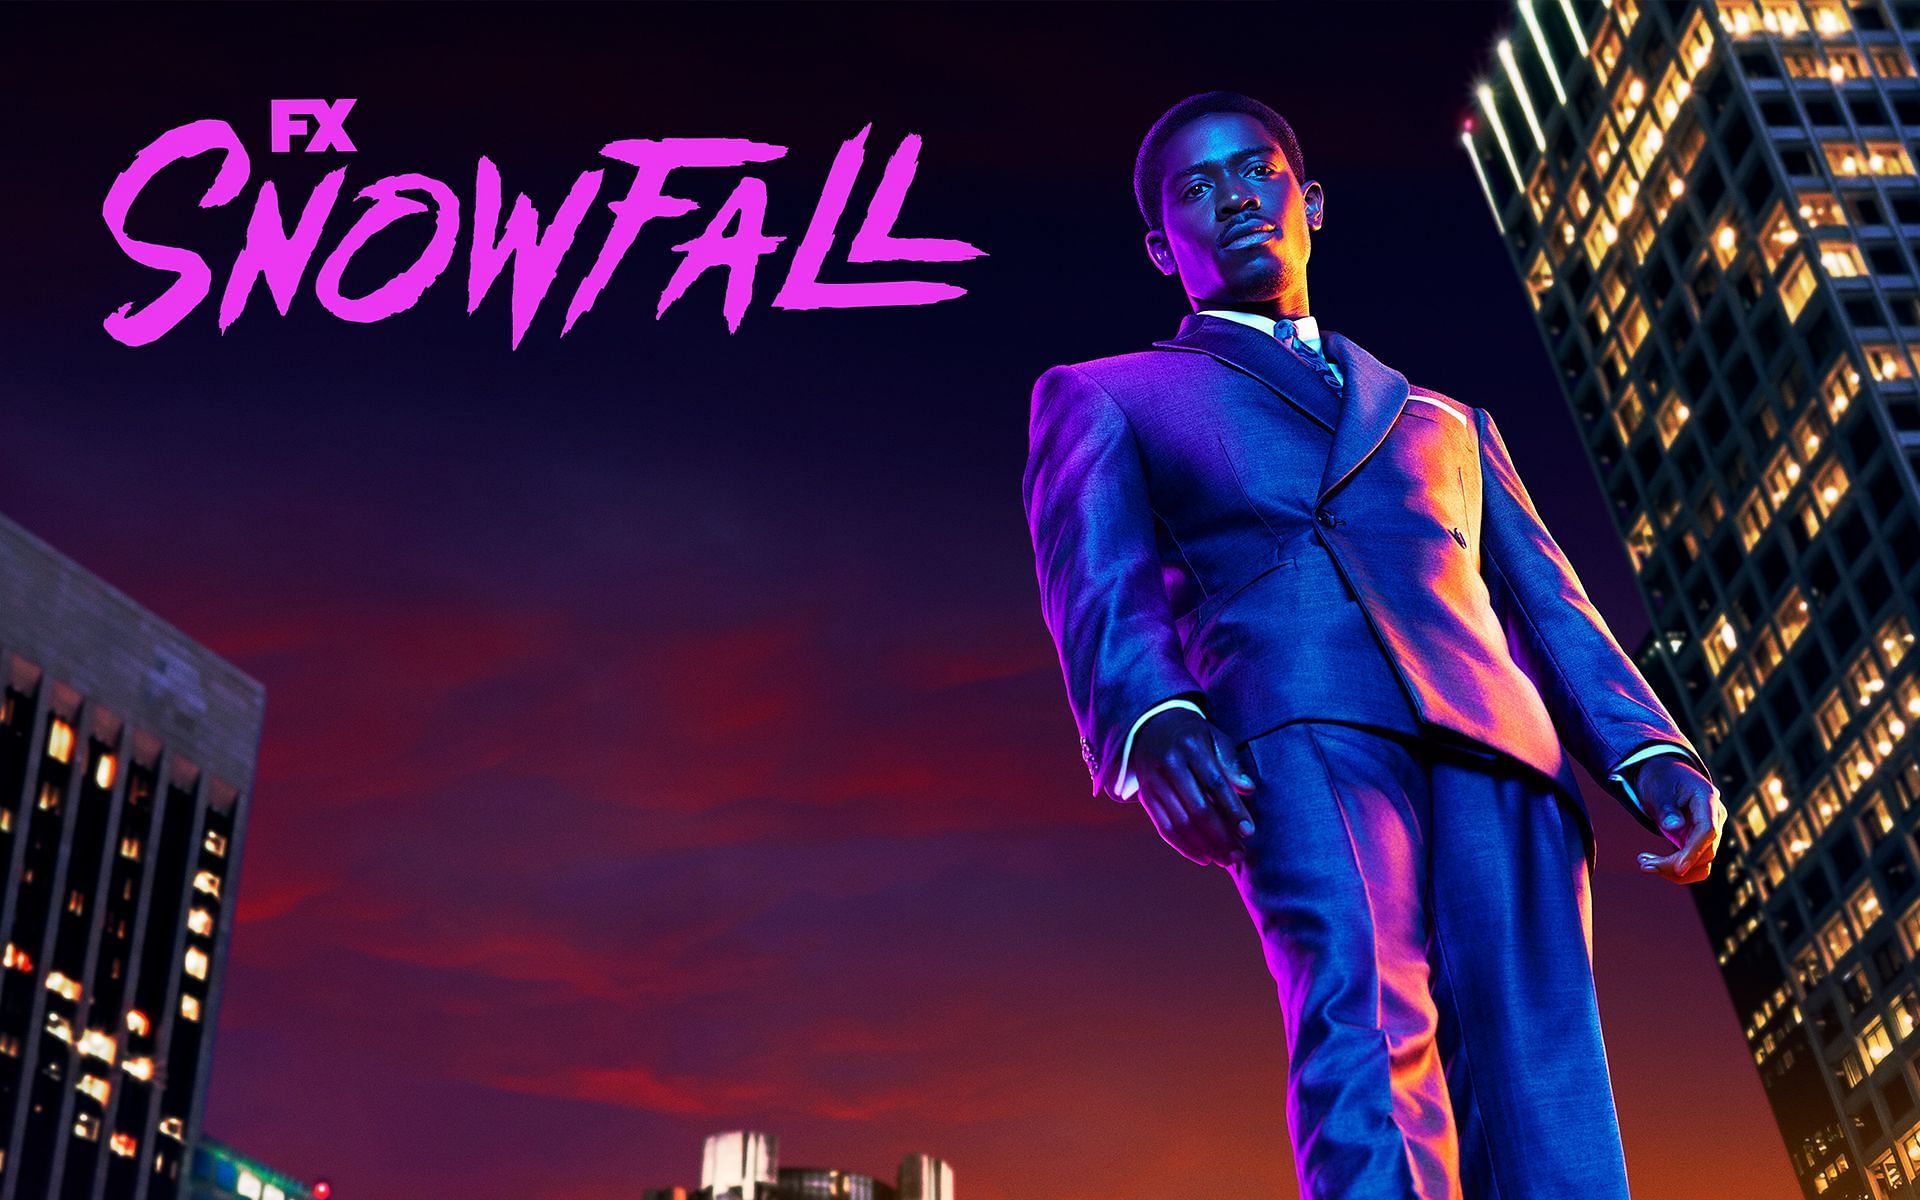 Snowfall Season 5 finale will be released on FX on April 20, 2022 and on Hulu on April 21, 2022 (Image via Prime Video)